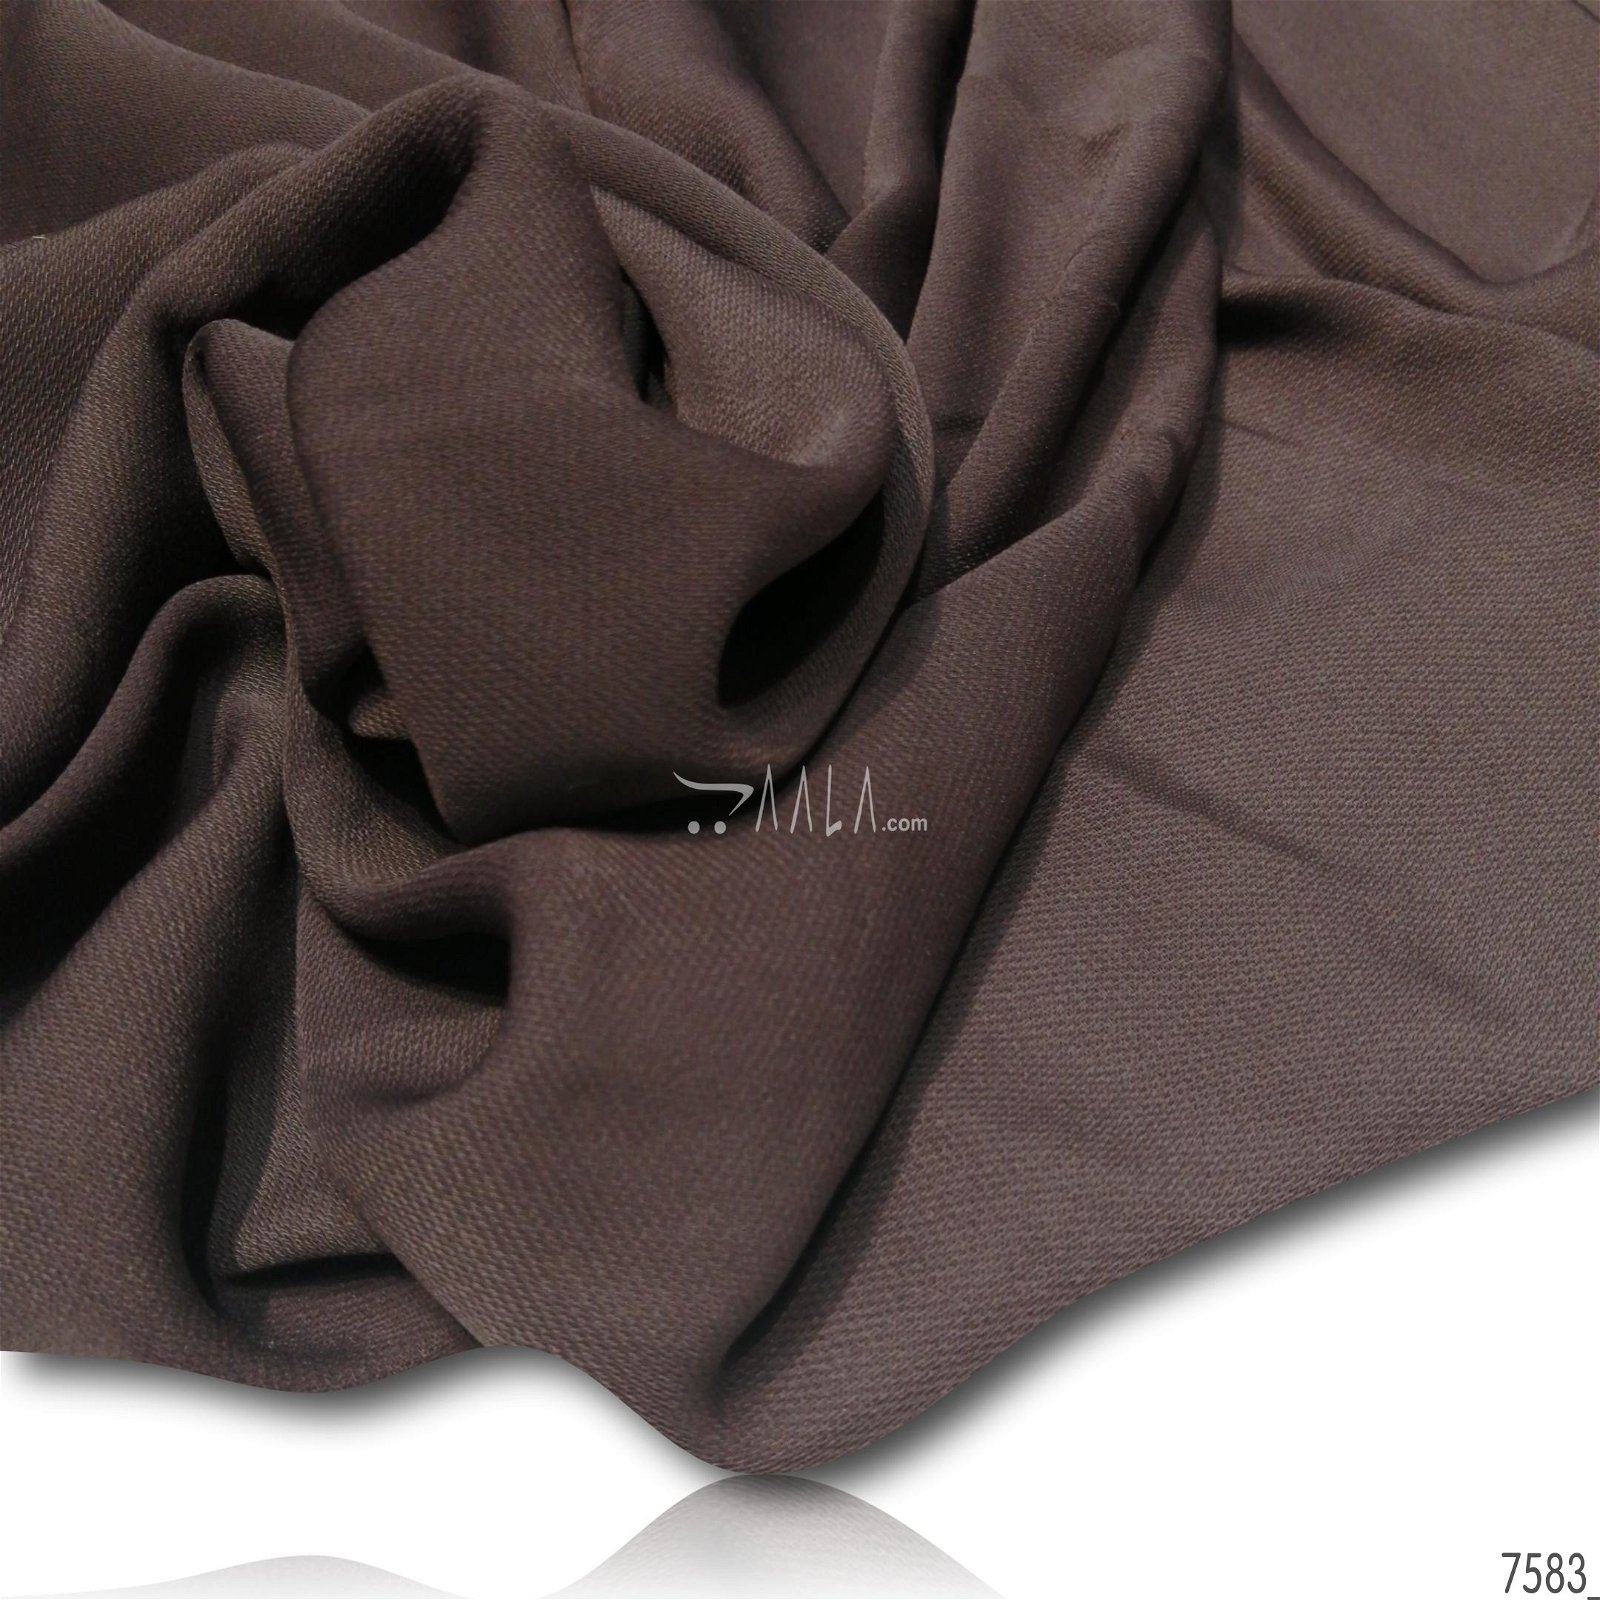 Moscow Double-Georgette Poly-ester 58-Inches BROWN Per-Metre #7583